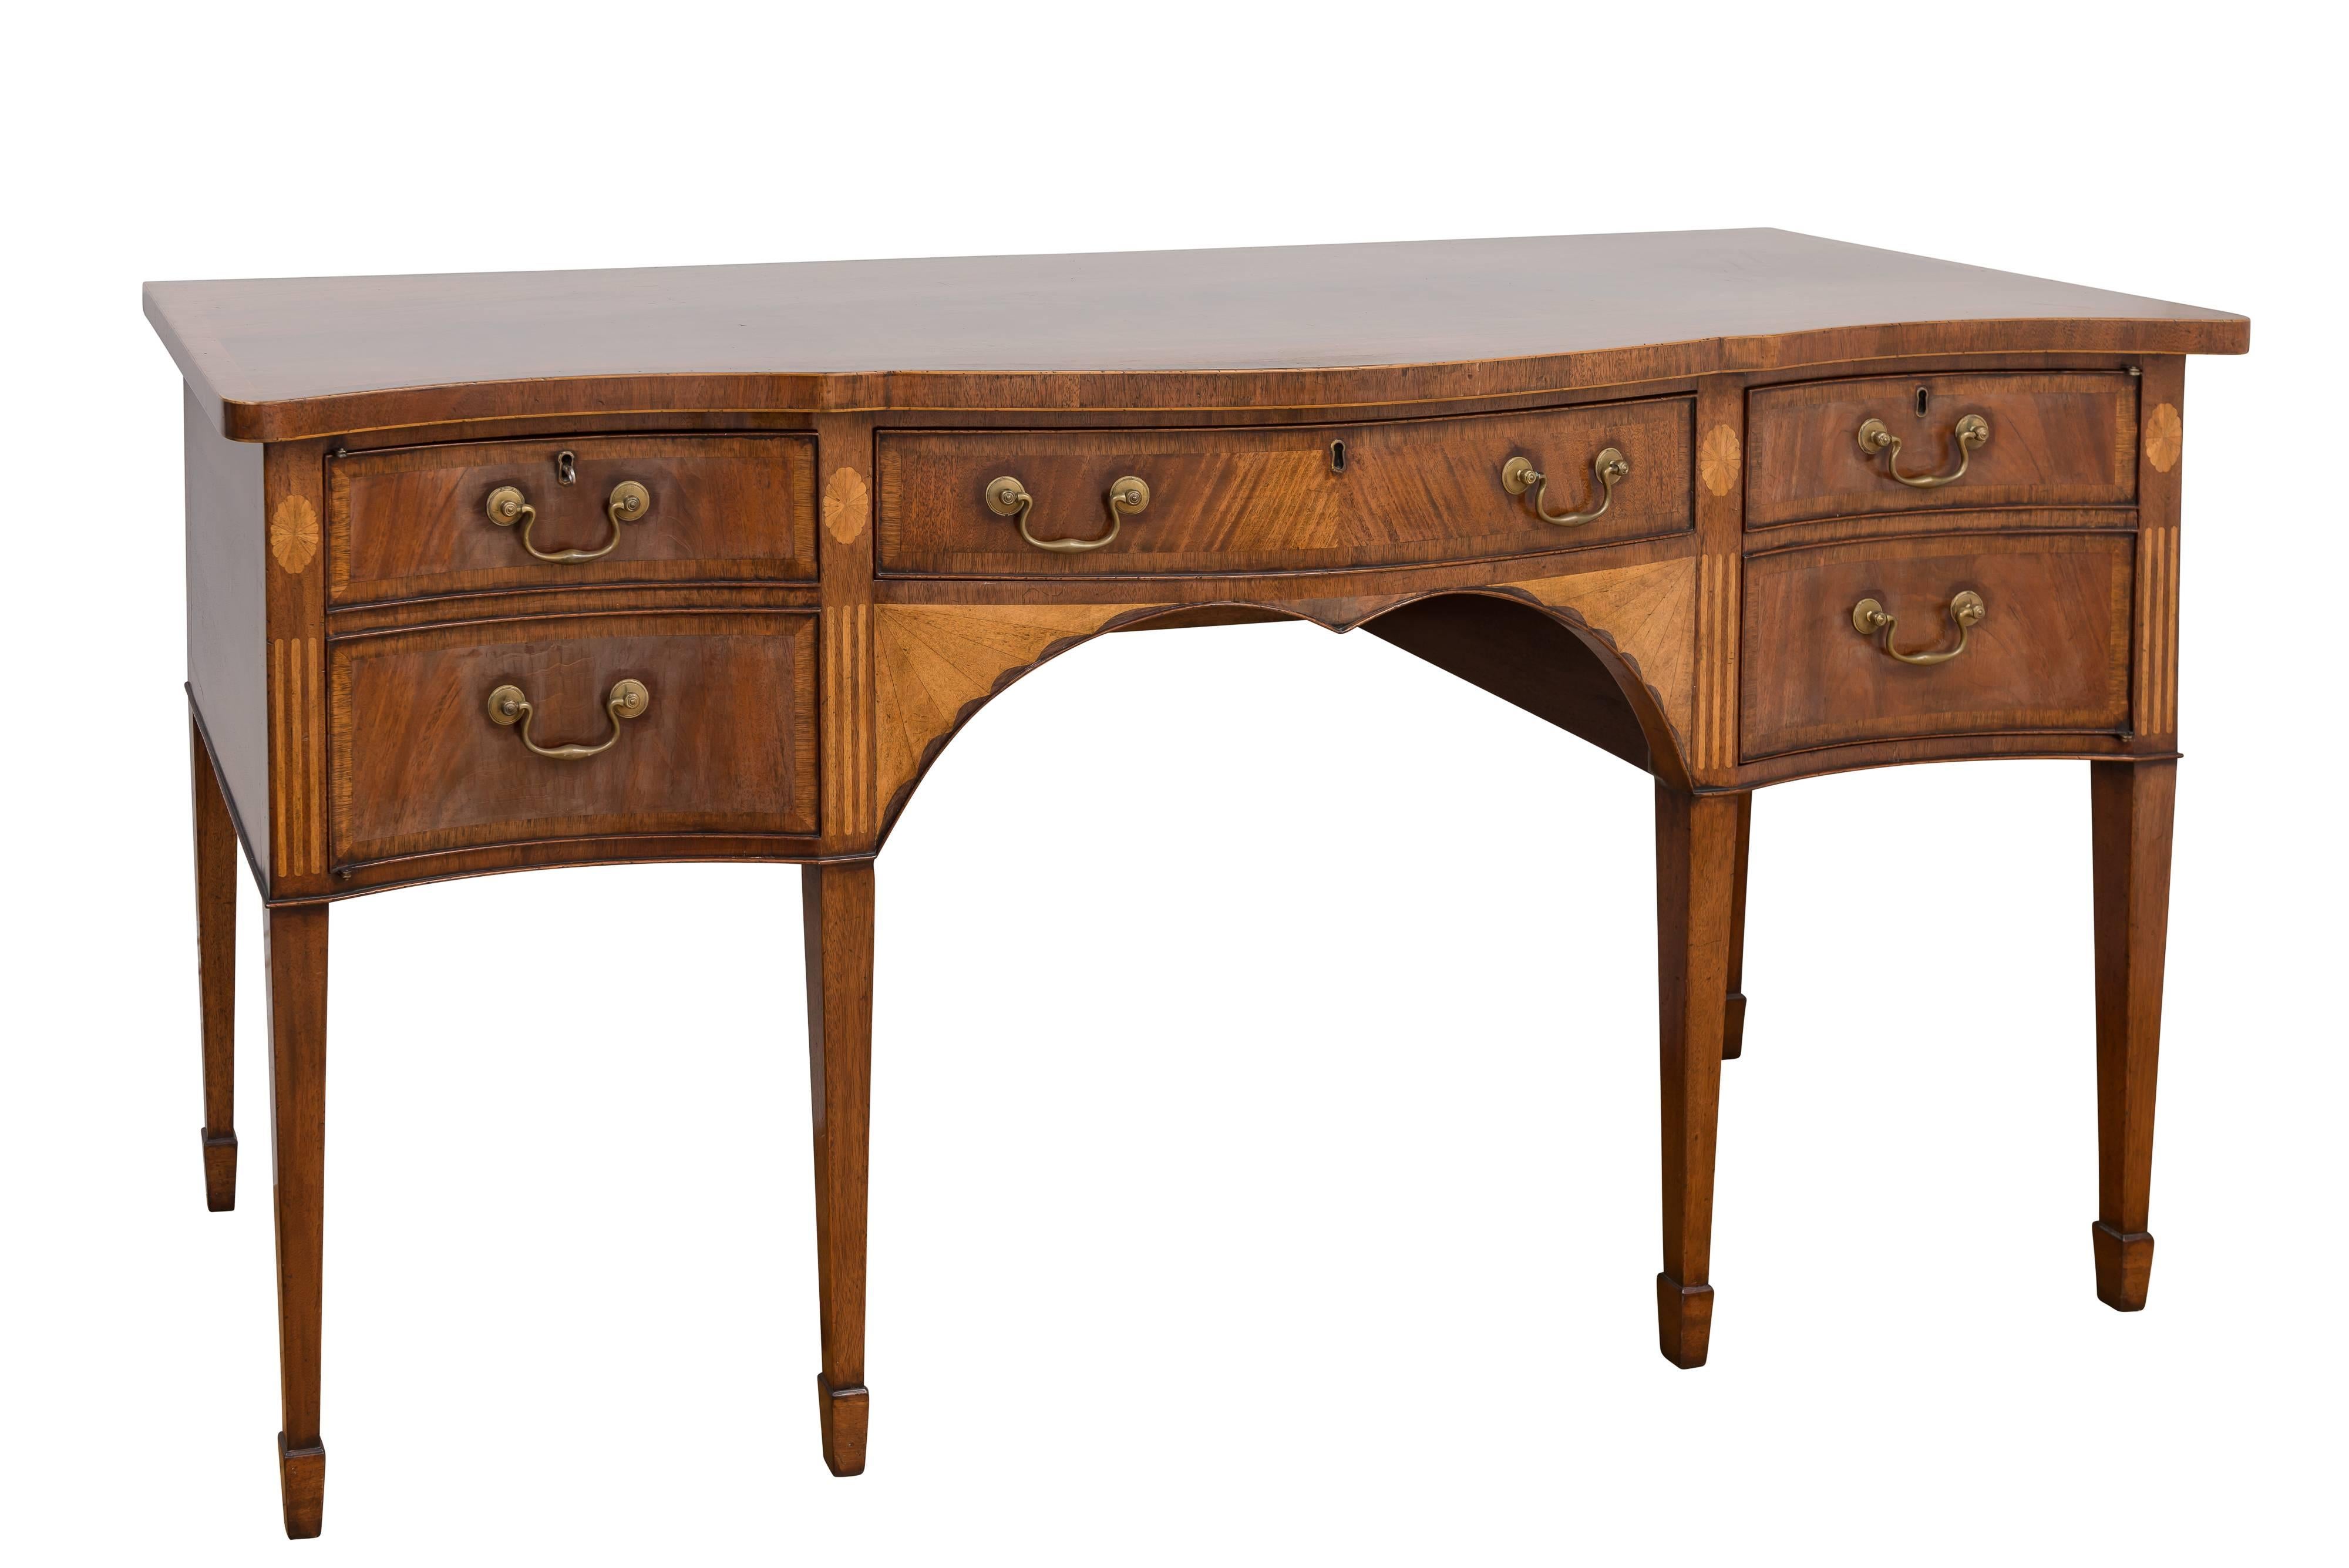 This fine reproduction mahogany sideboard has a serpentine top with inlay edge detail. The sideboard has one center drawer and two concave doors that have crossbanding on perimeter borders. The front has inlay rosette and channel detail on tapered